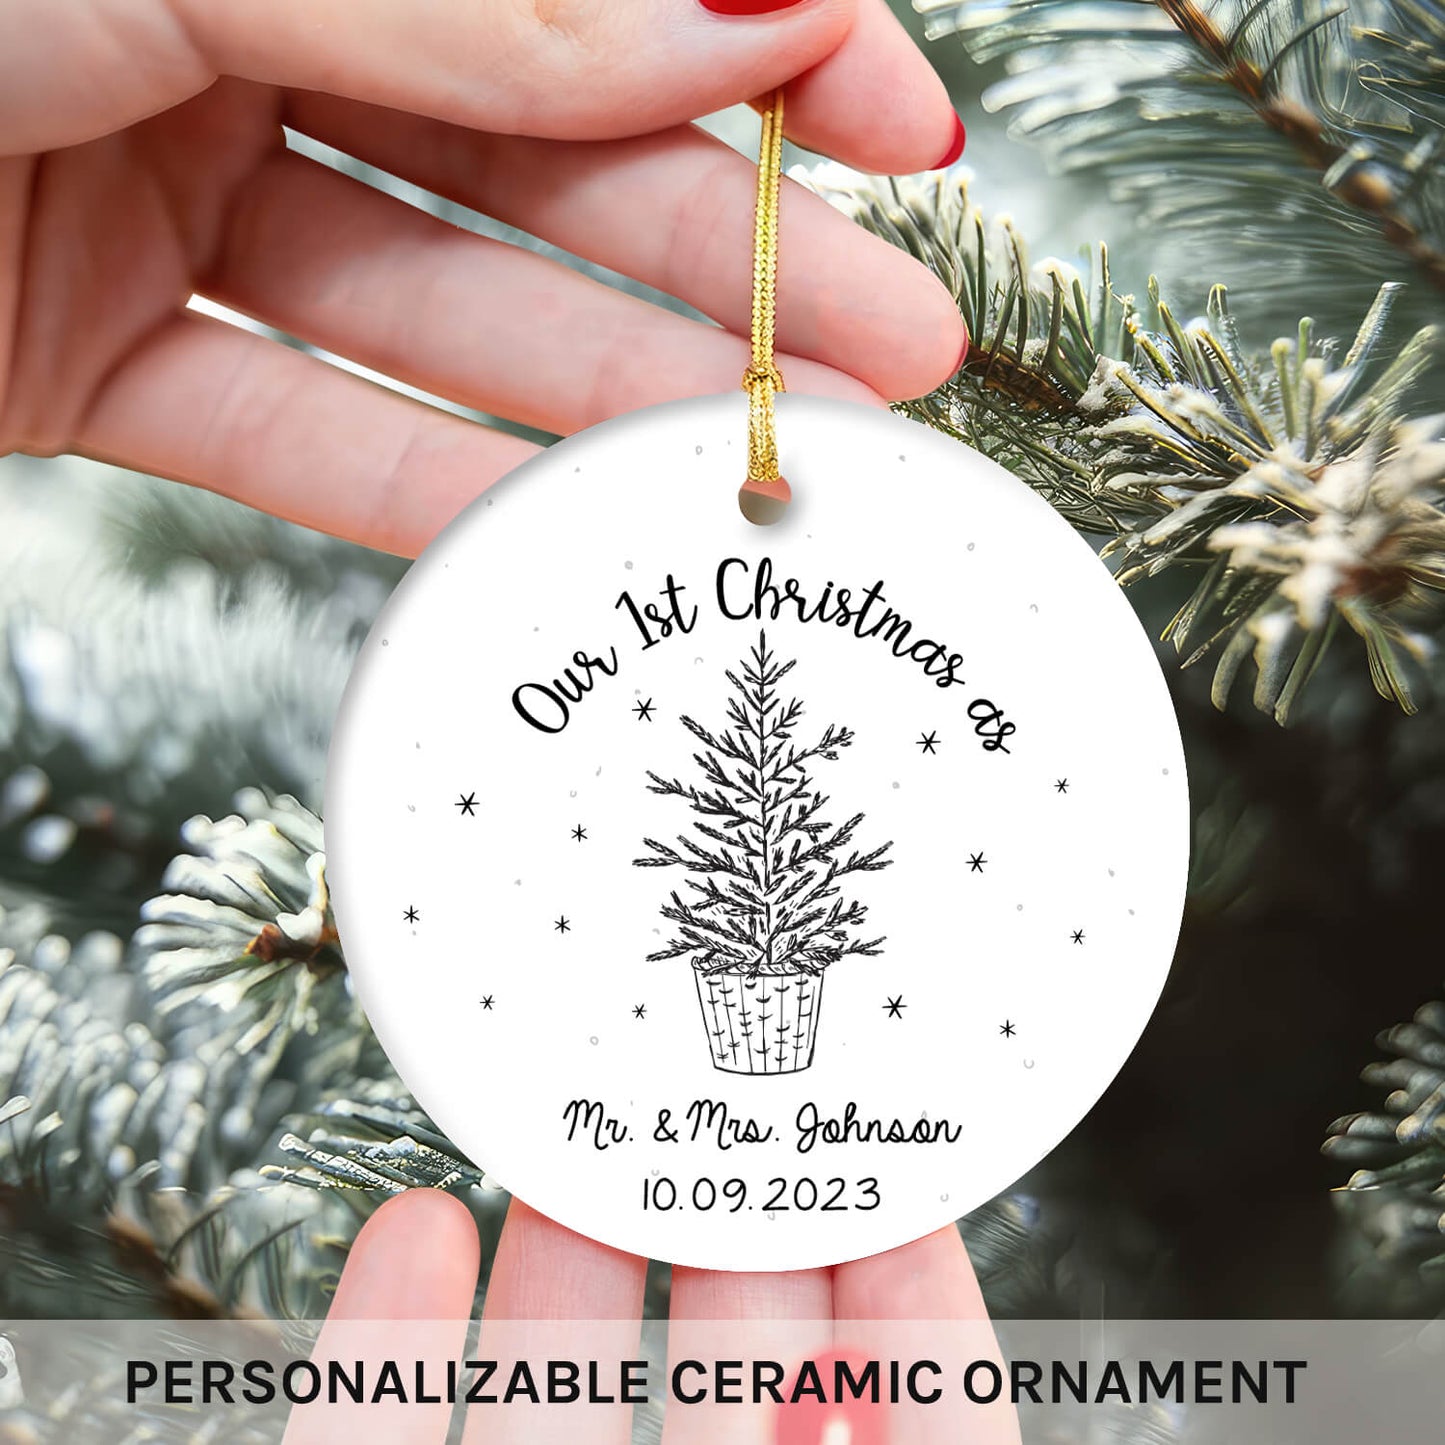 Our 1st Christmas as Mr. & Mrs, - Personalized First Christmas gift For Husband or Wife - Custom Circle Ceramic Ornament - MyMindfulGifts